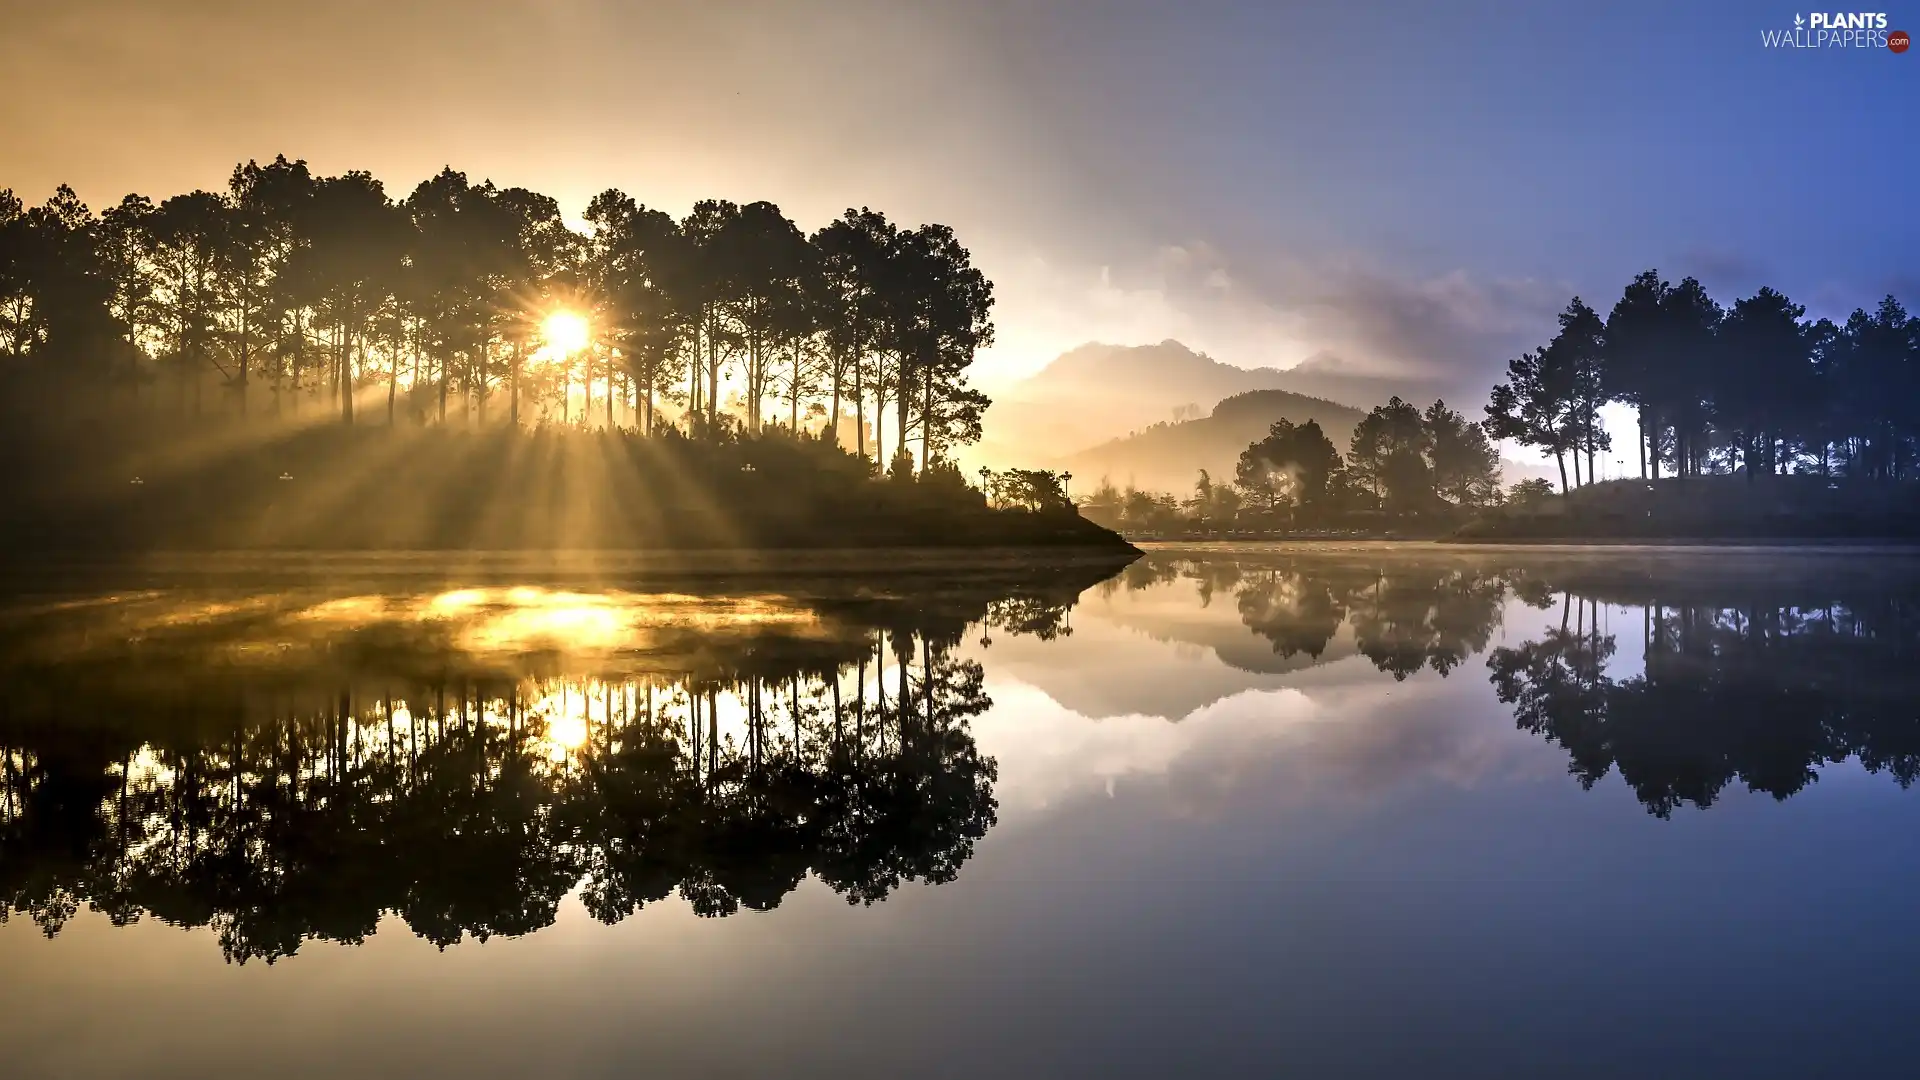 viewes, illuminated, reflection, trees, lake, light breaking through sky, Mountains